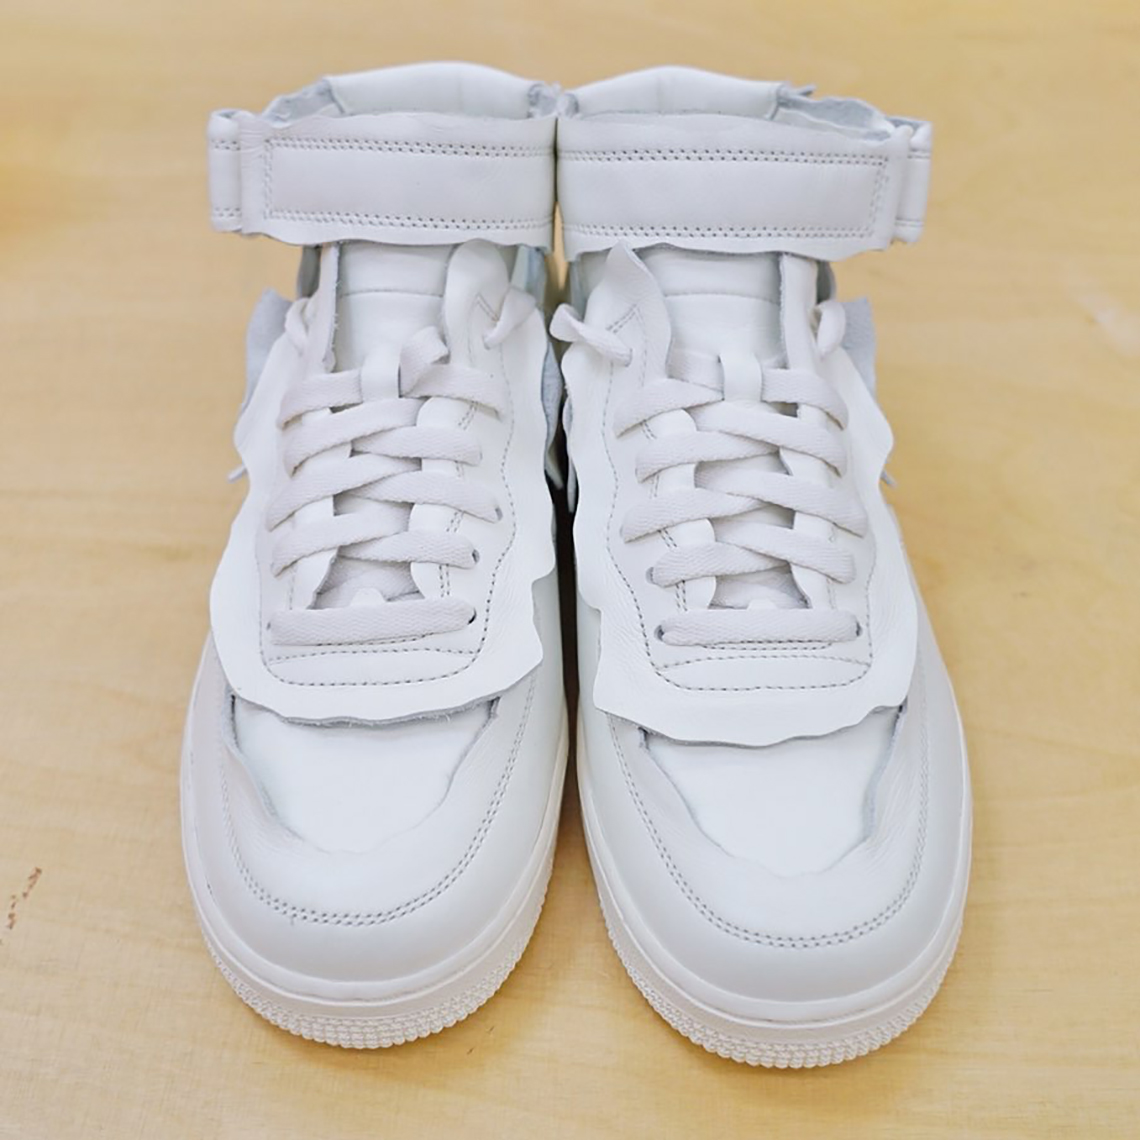 COMME des GARCONS Nike Air Force 1 AW 2020 Release Info 